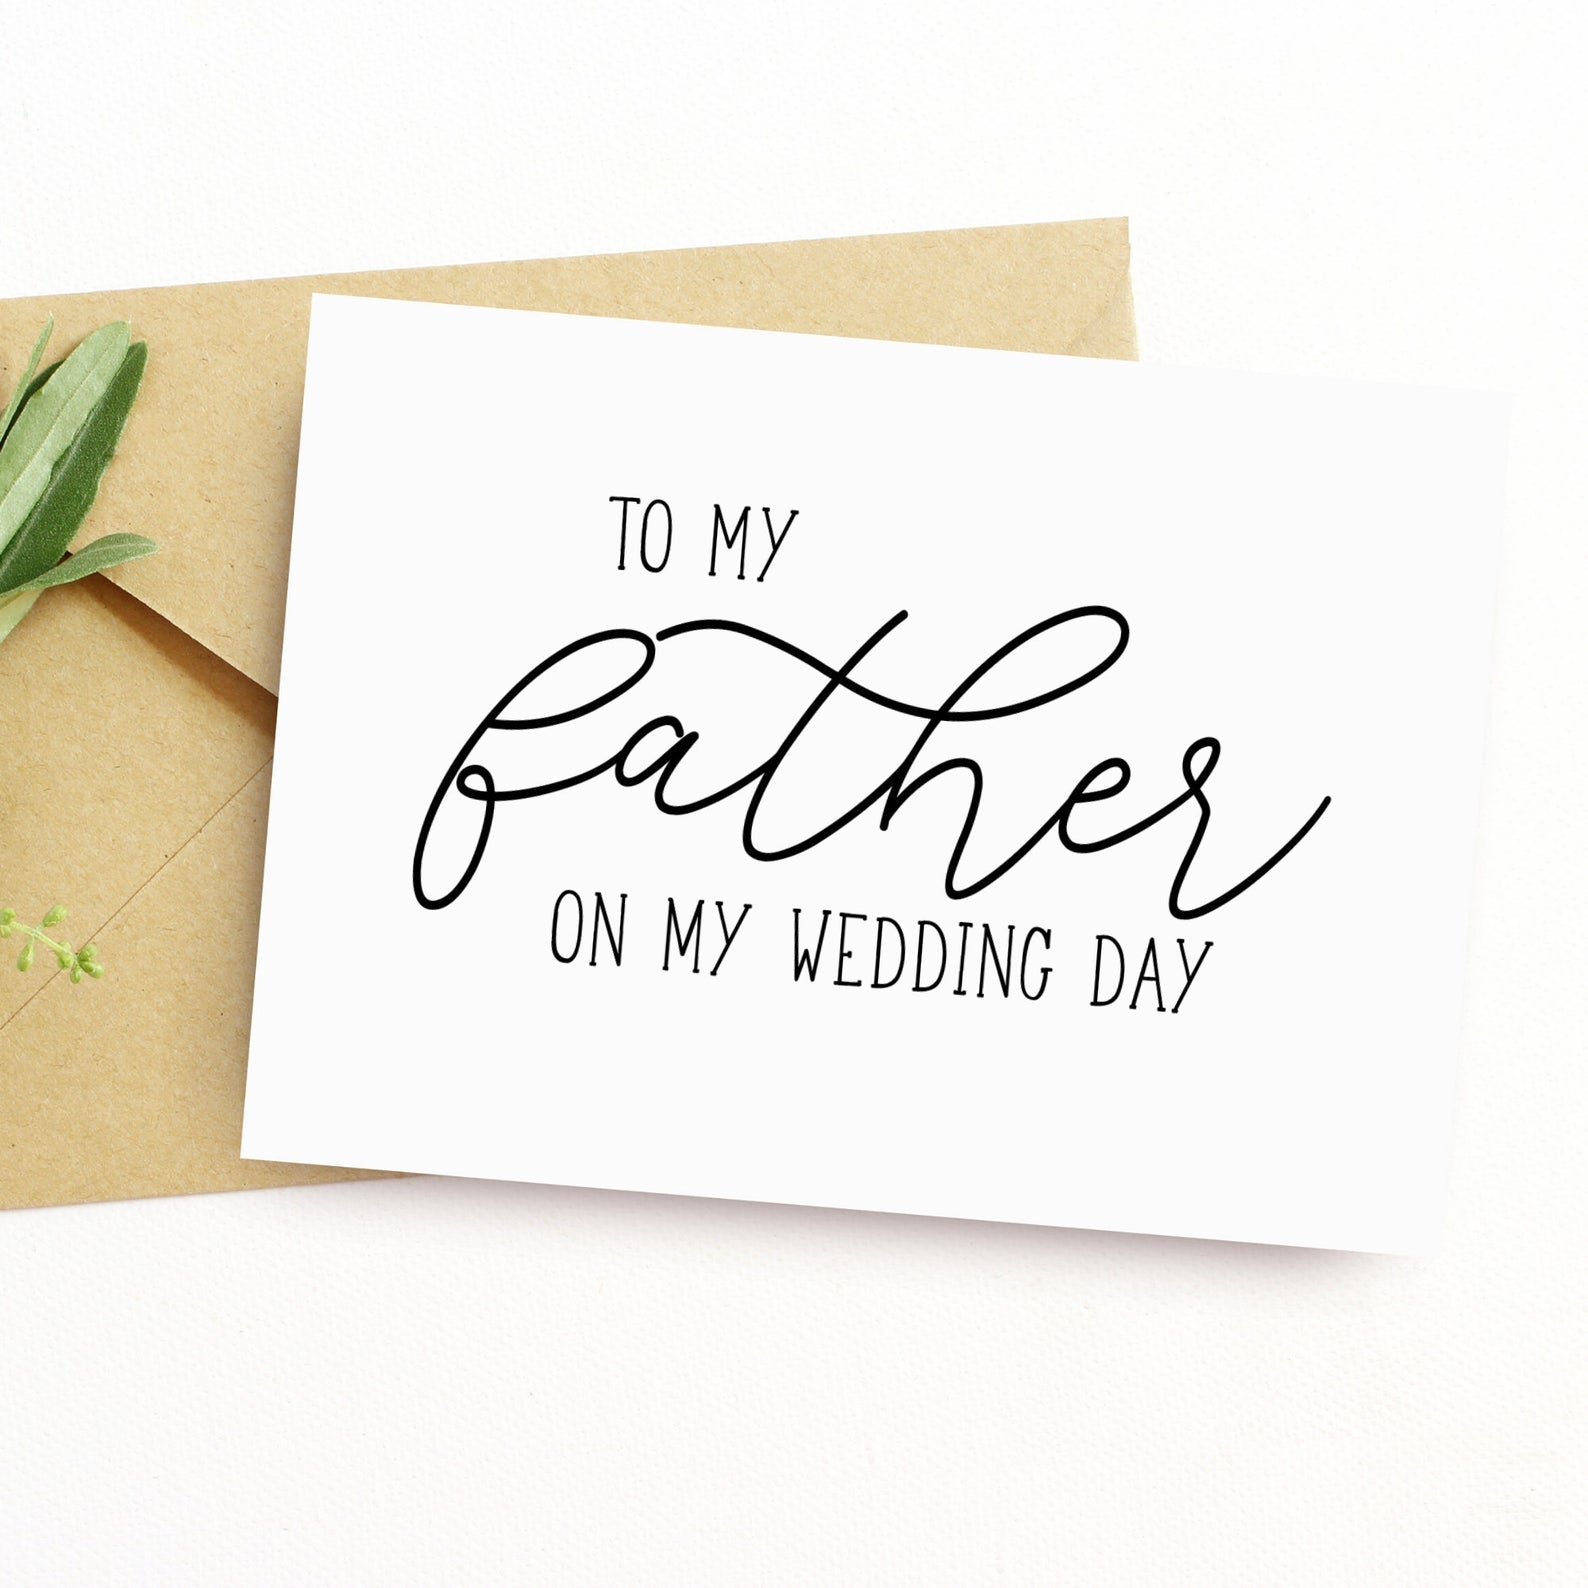 To My Father On My Wedding Day Card - NKIN